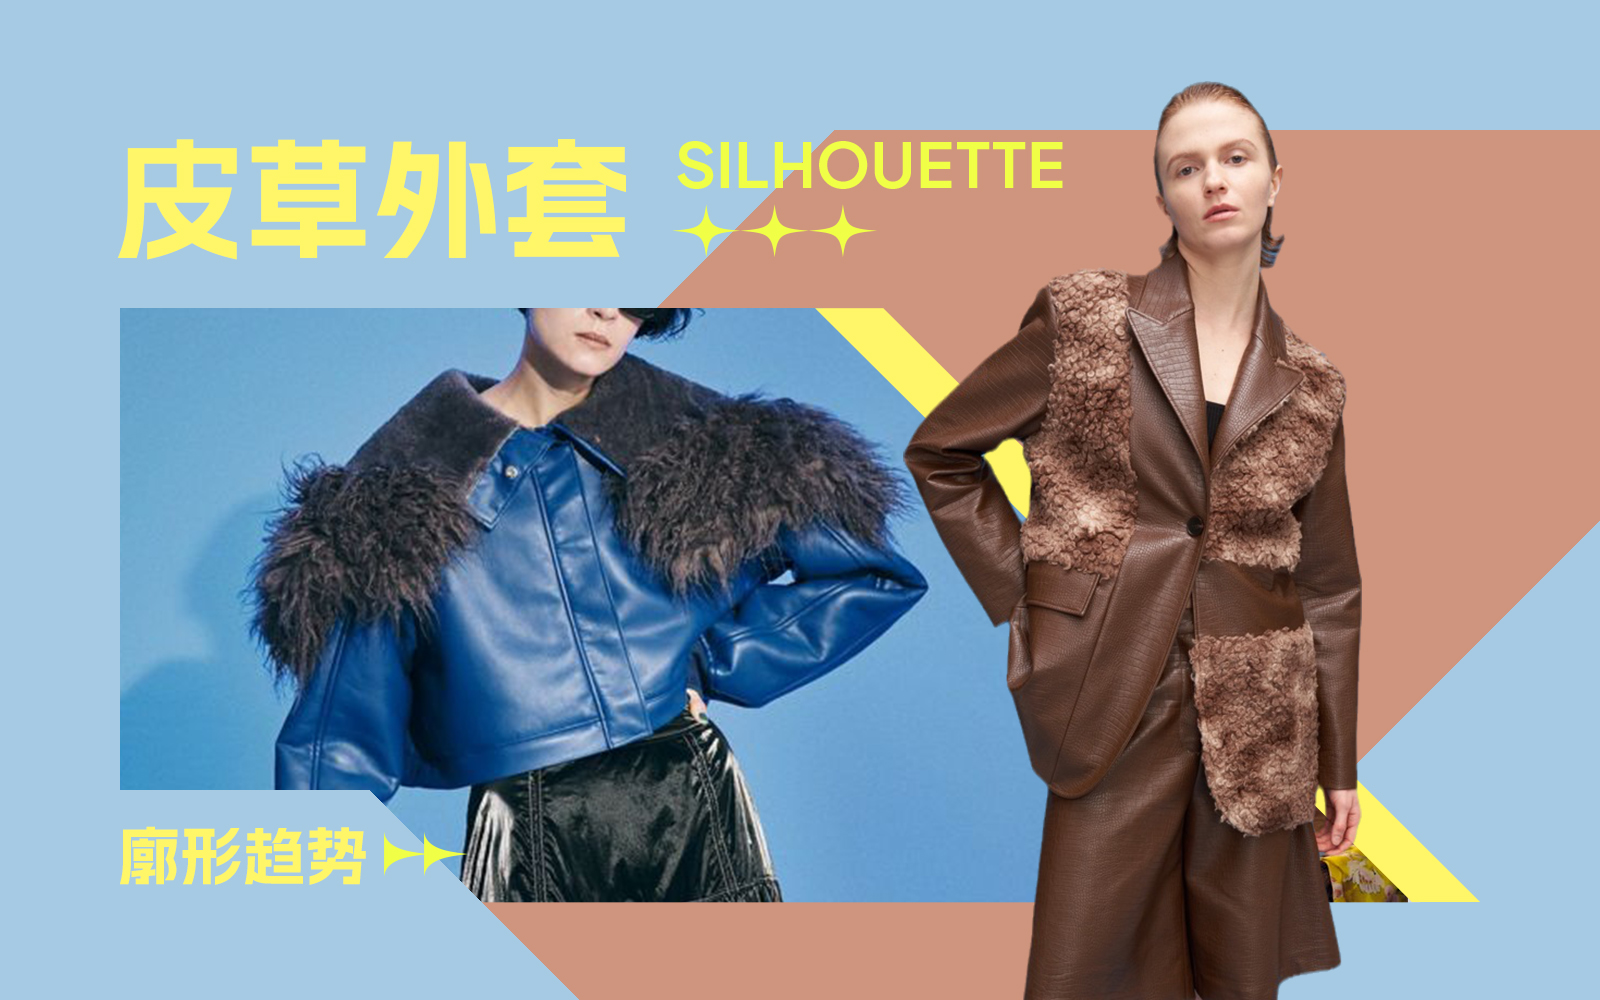 New Vintage -- The Silhouette Trend for Women's Leather & Fur